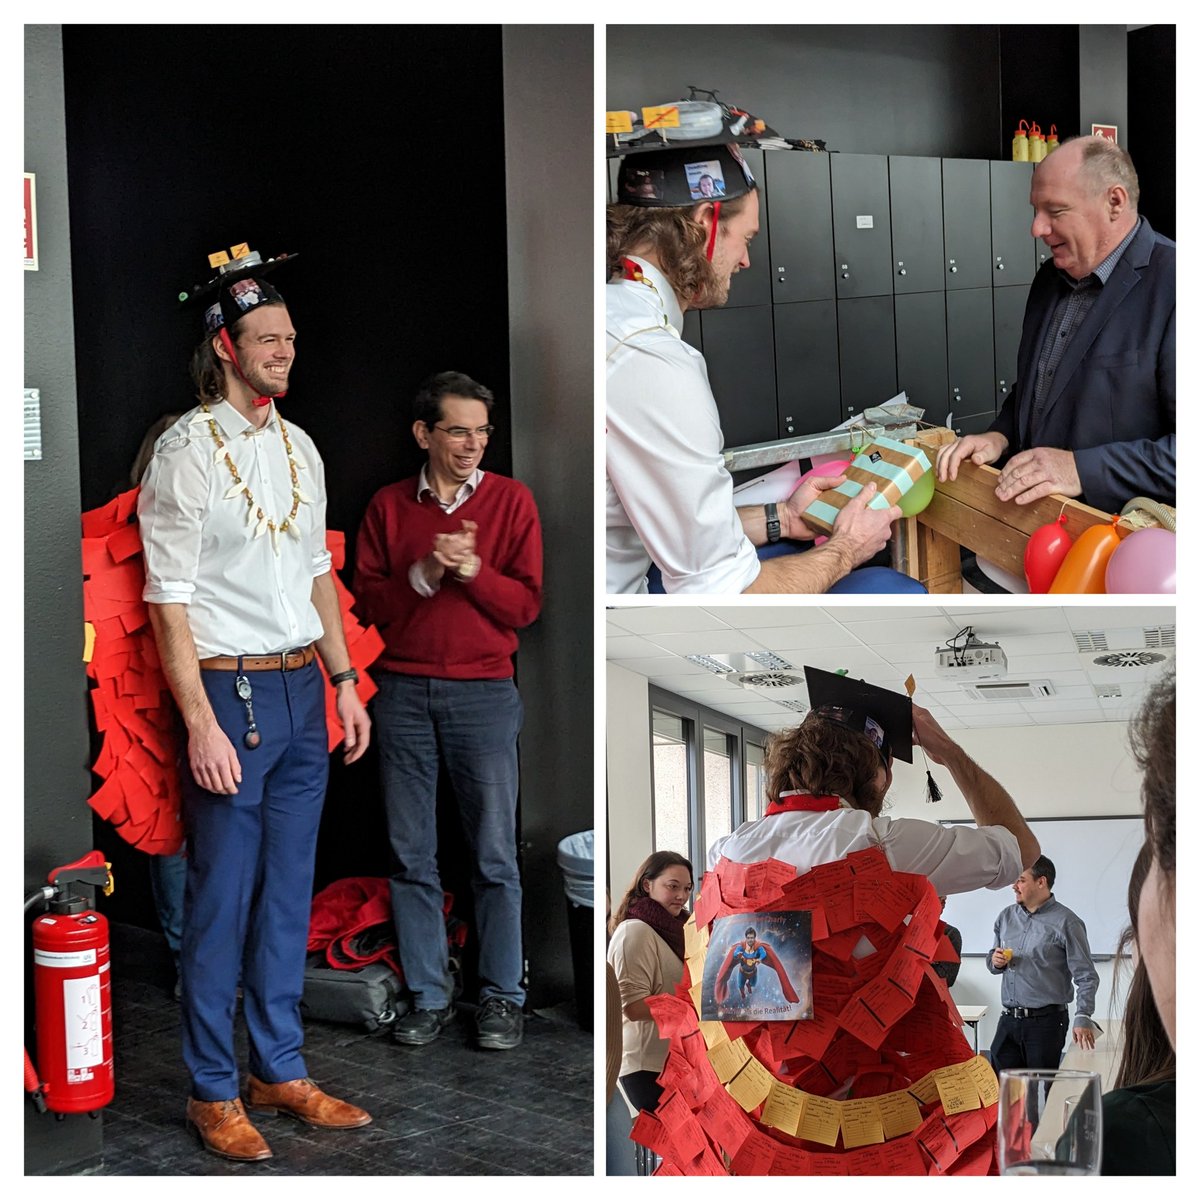 Congratulations to  Superresolution-Charly @stxfreak for successfully defending his PhD thesis @RVZ_Wuerburg 🎉! Great job! @LabSauer @GSLSUniWue
#WuerzburgPlateletGroup